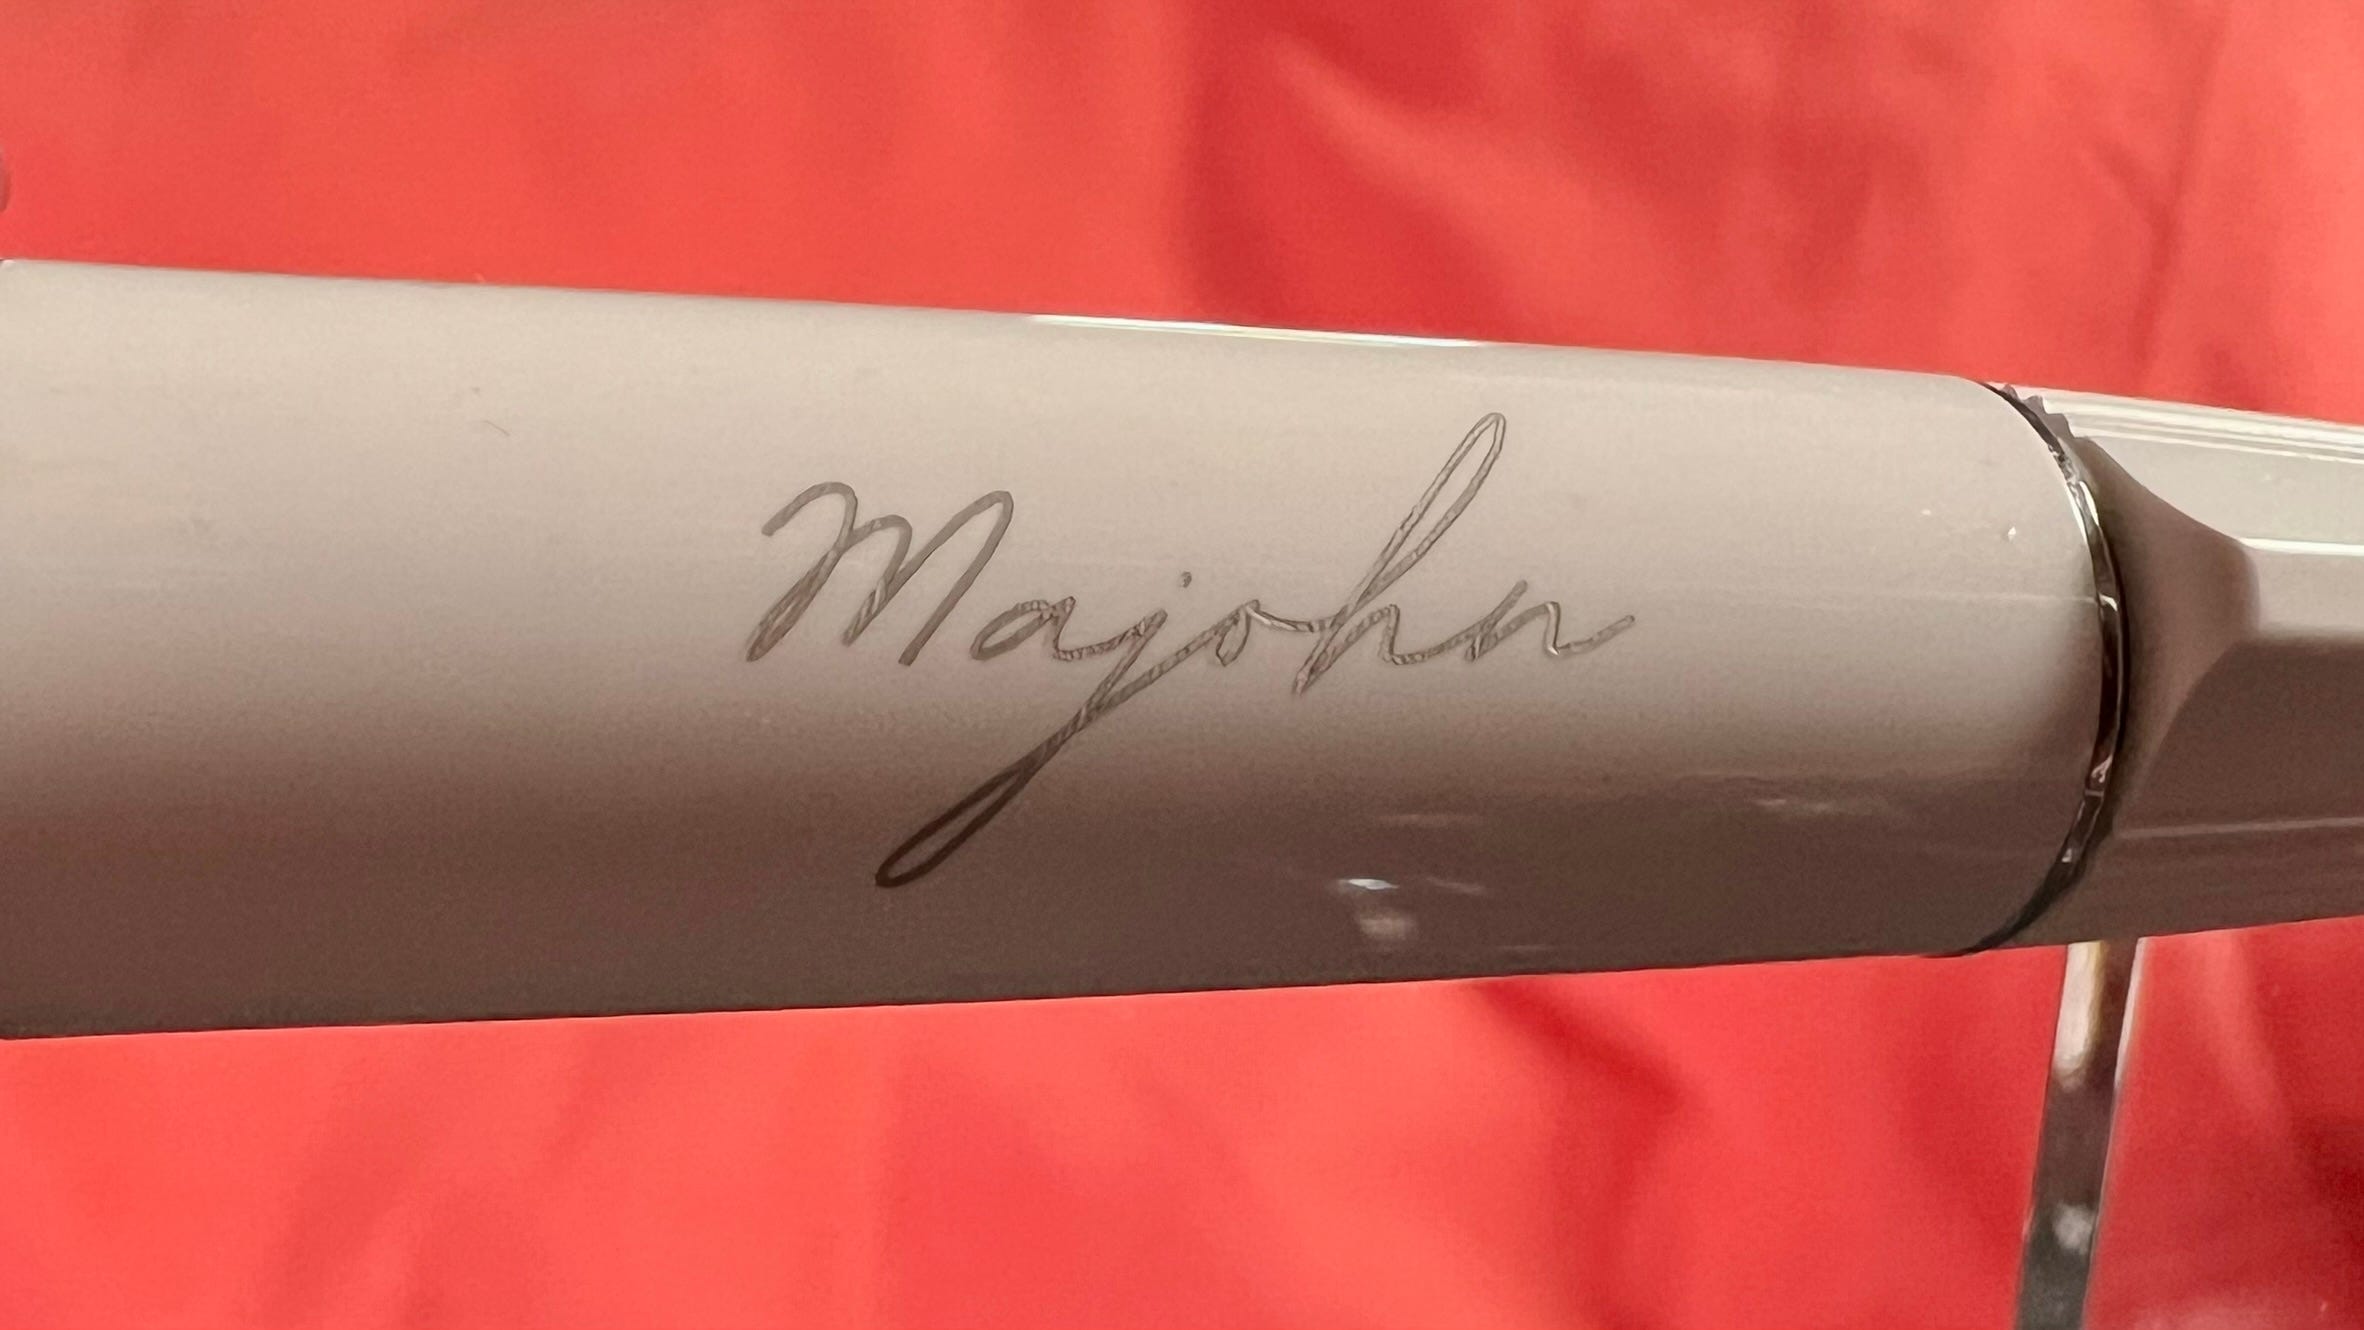 A closeup of the A3 showing the silver hand-written styled "Majohn" branding on the white body. 